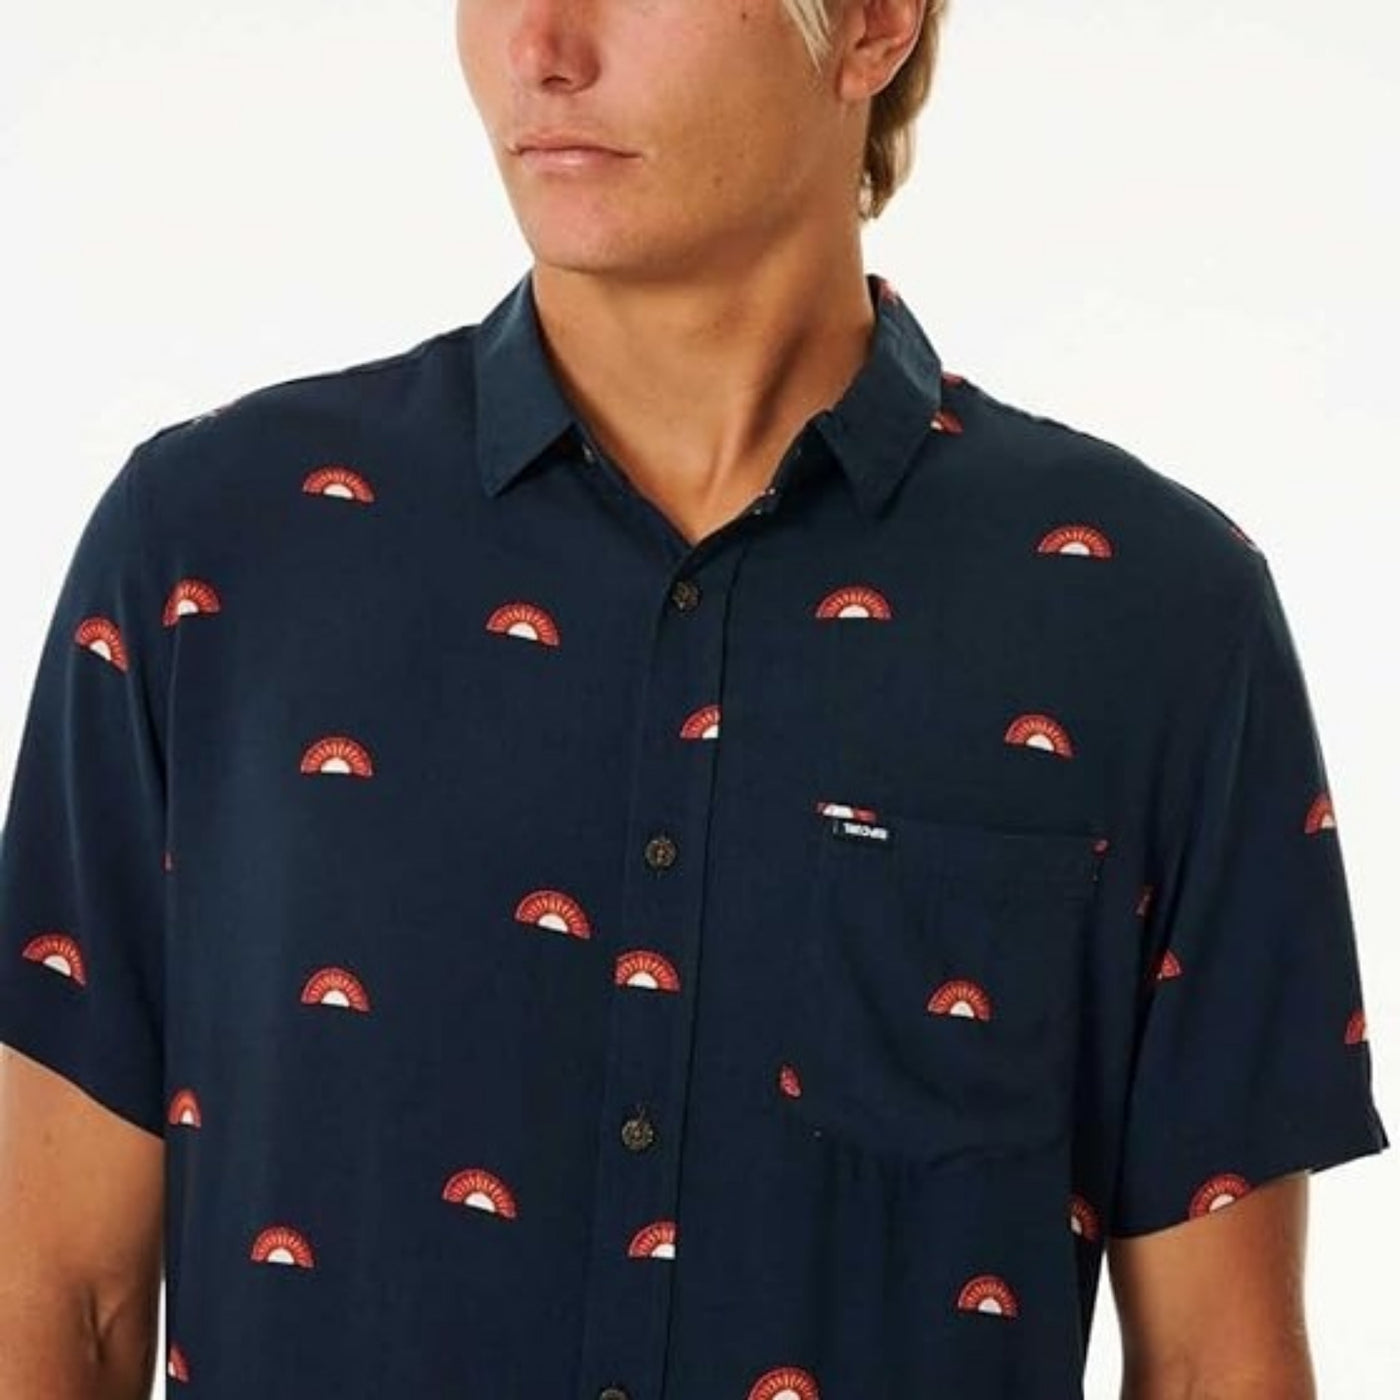 Rip Curl Party Pack Short Sleeve Shirt - Navy